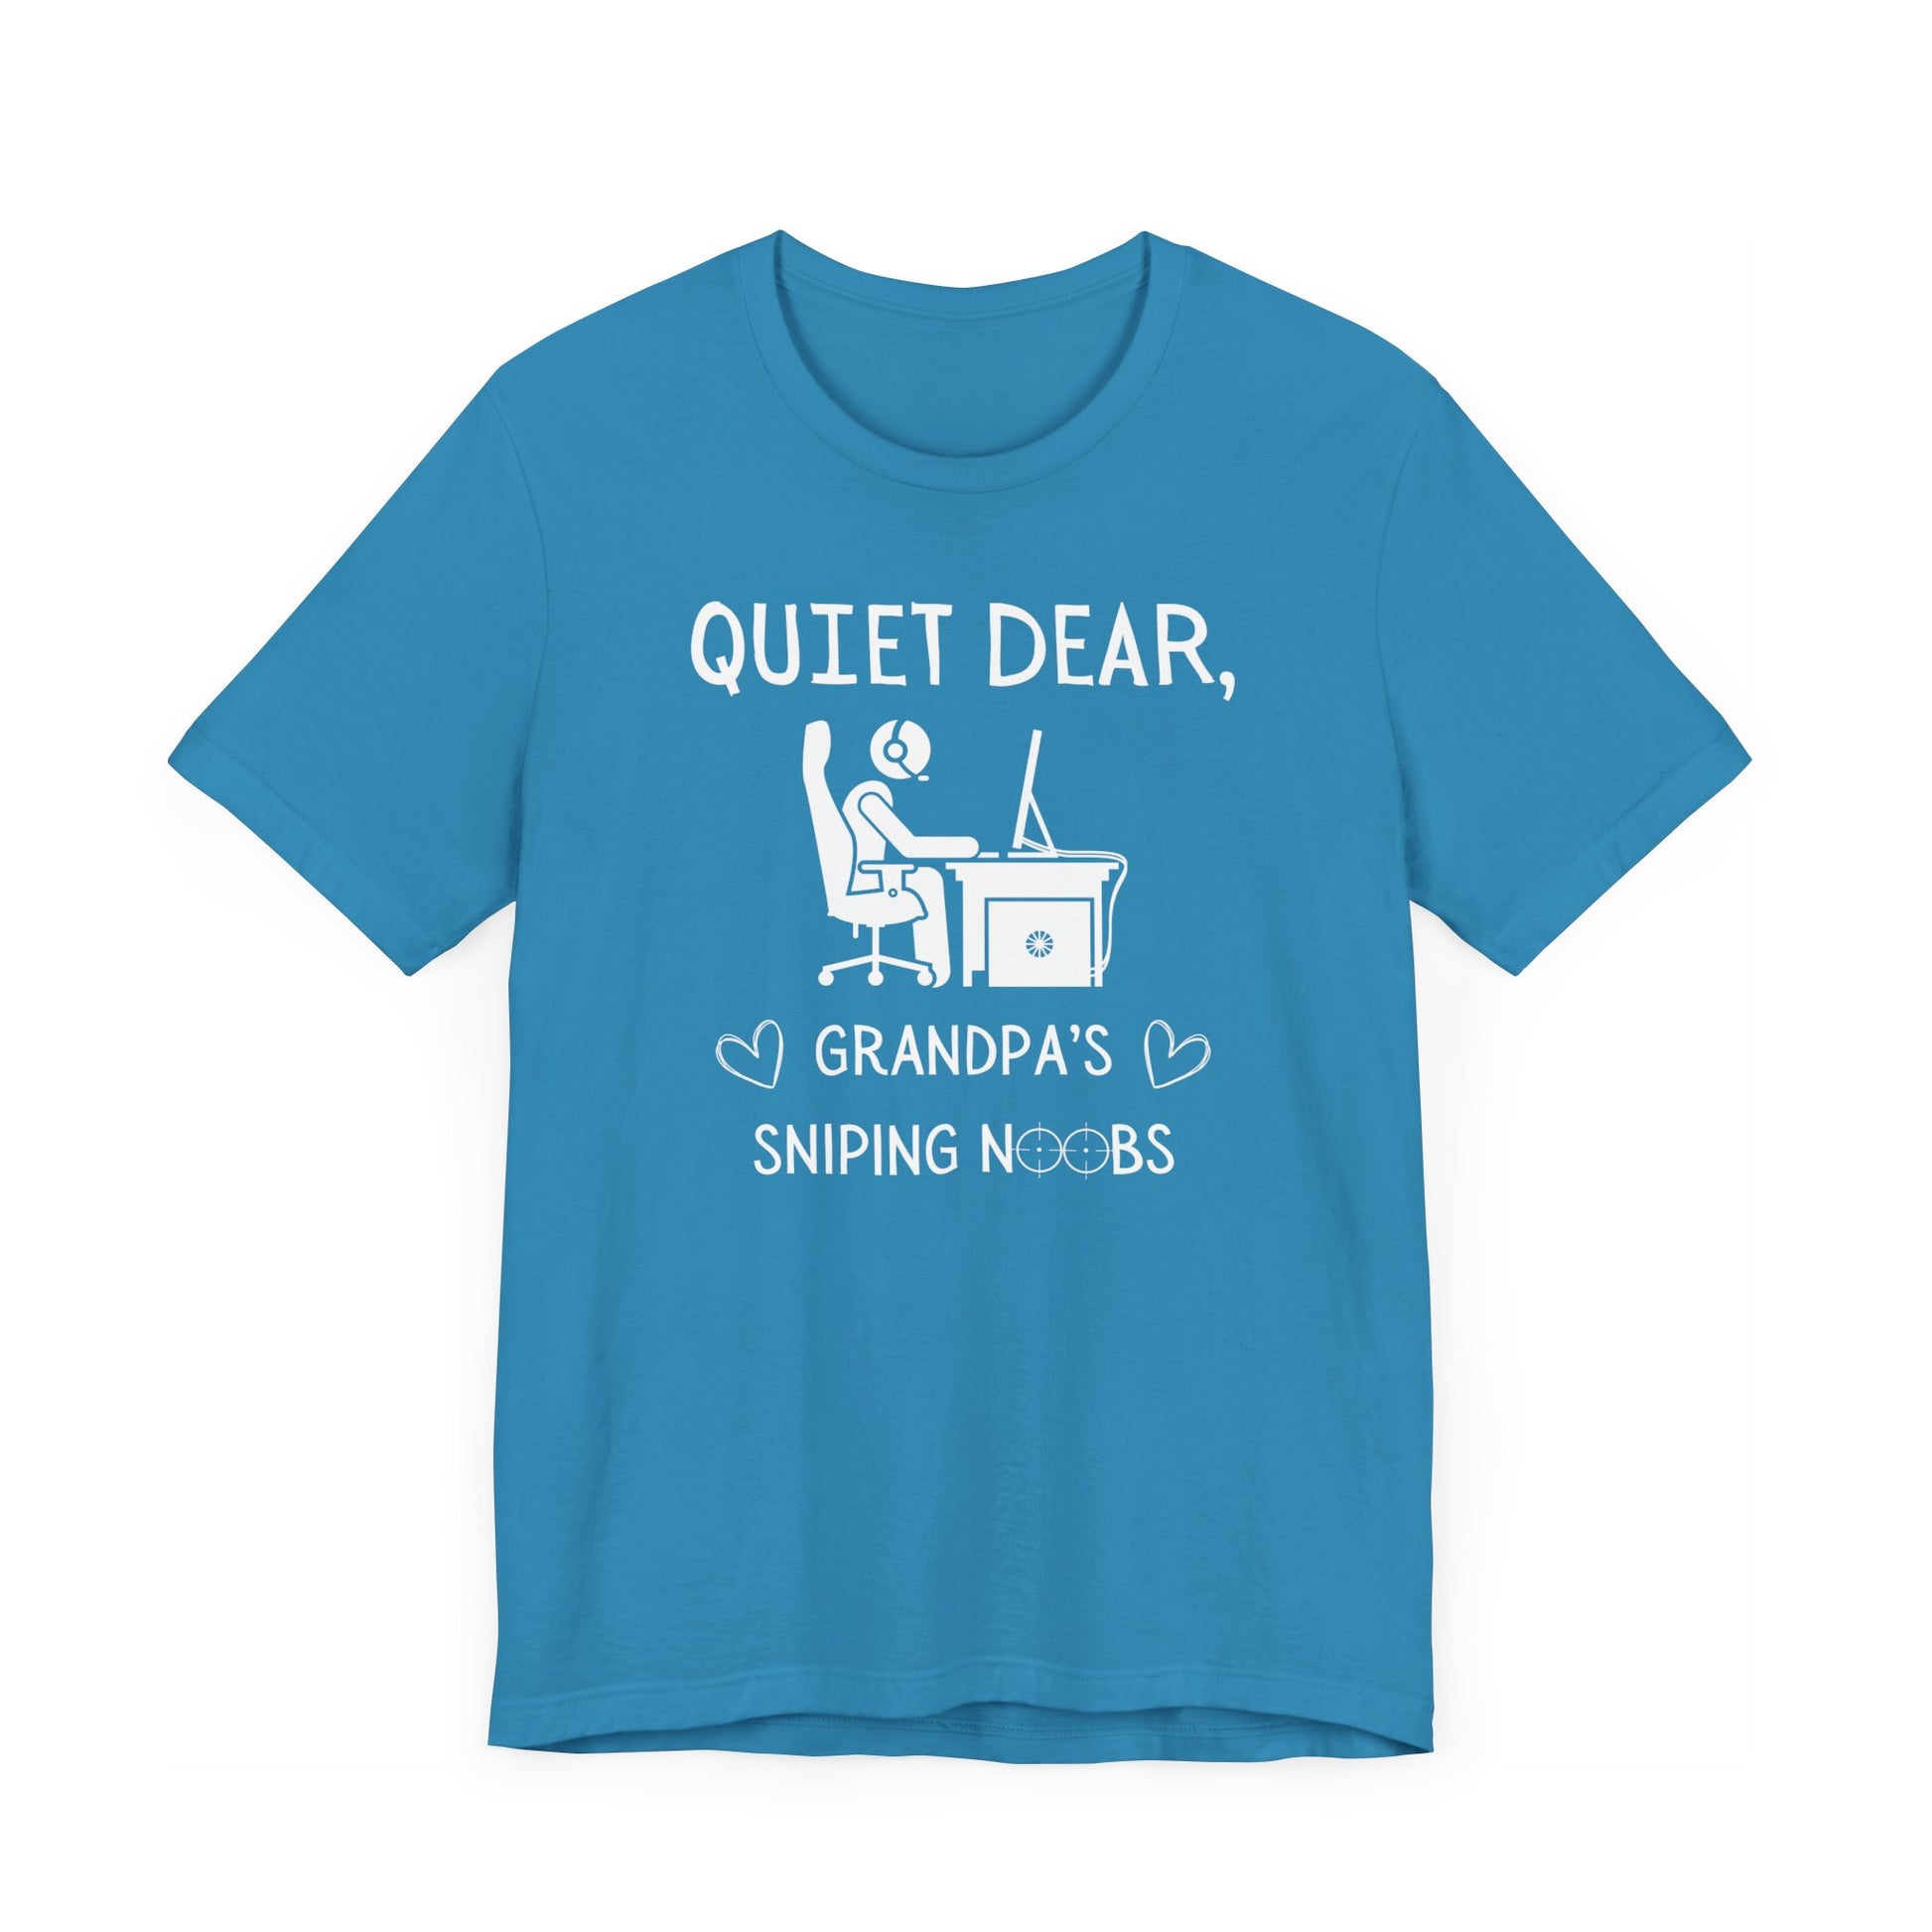 A flat image of an aqua t-shirt that reads Quiet Dear, Grandpa's Sniping Noobs in white text. The lower text is framed by two hearts, and the O's are in the shape of sniper scopes. In the center of the shirt is an image of a person at a desk with a gaming PC.